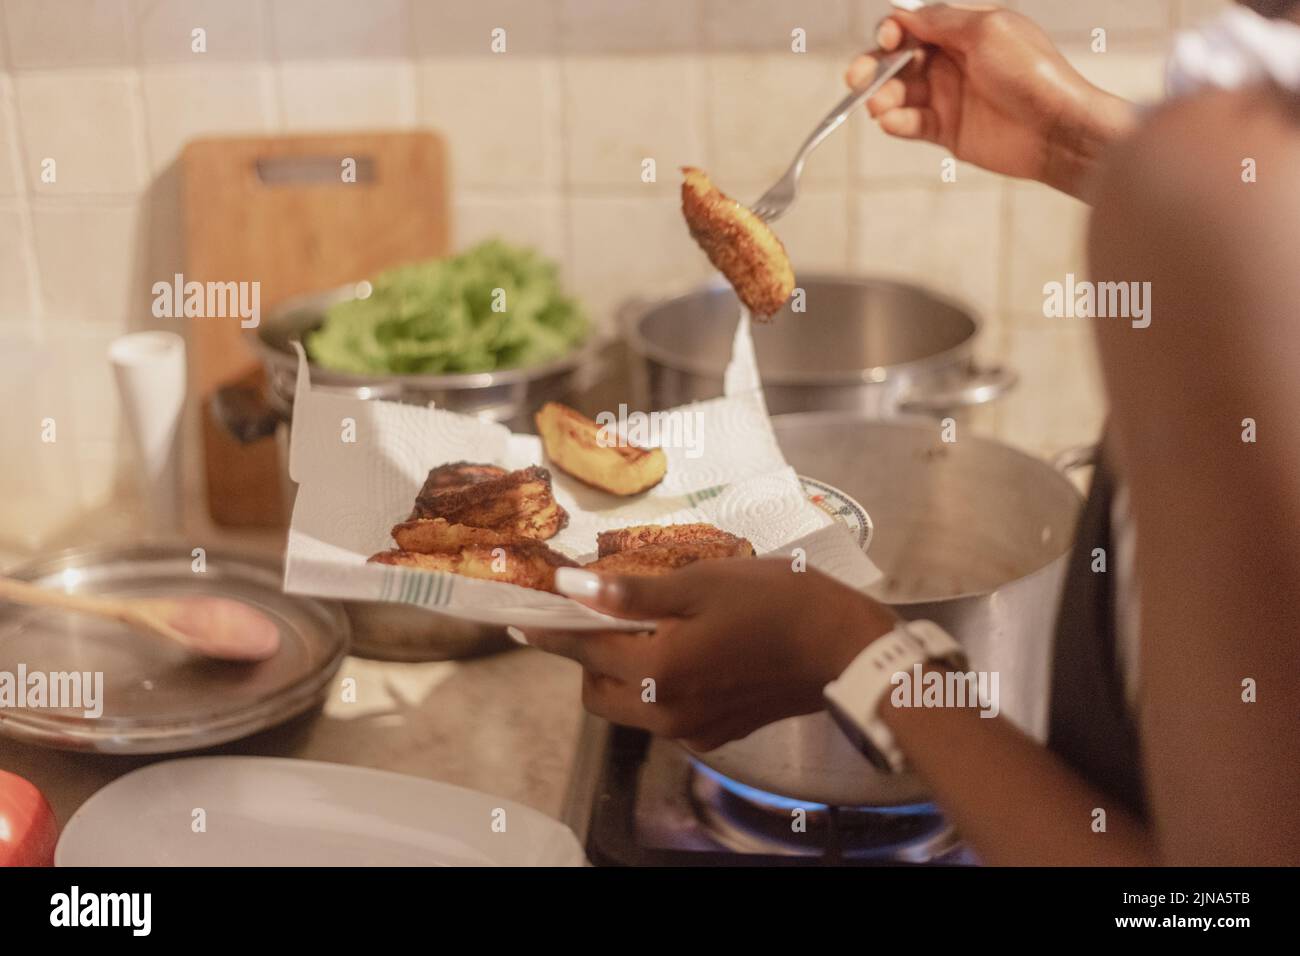 woman chef preparing african caribbean food with plantain plane tree fruit Stock Photo